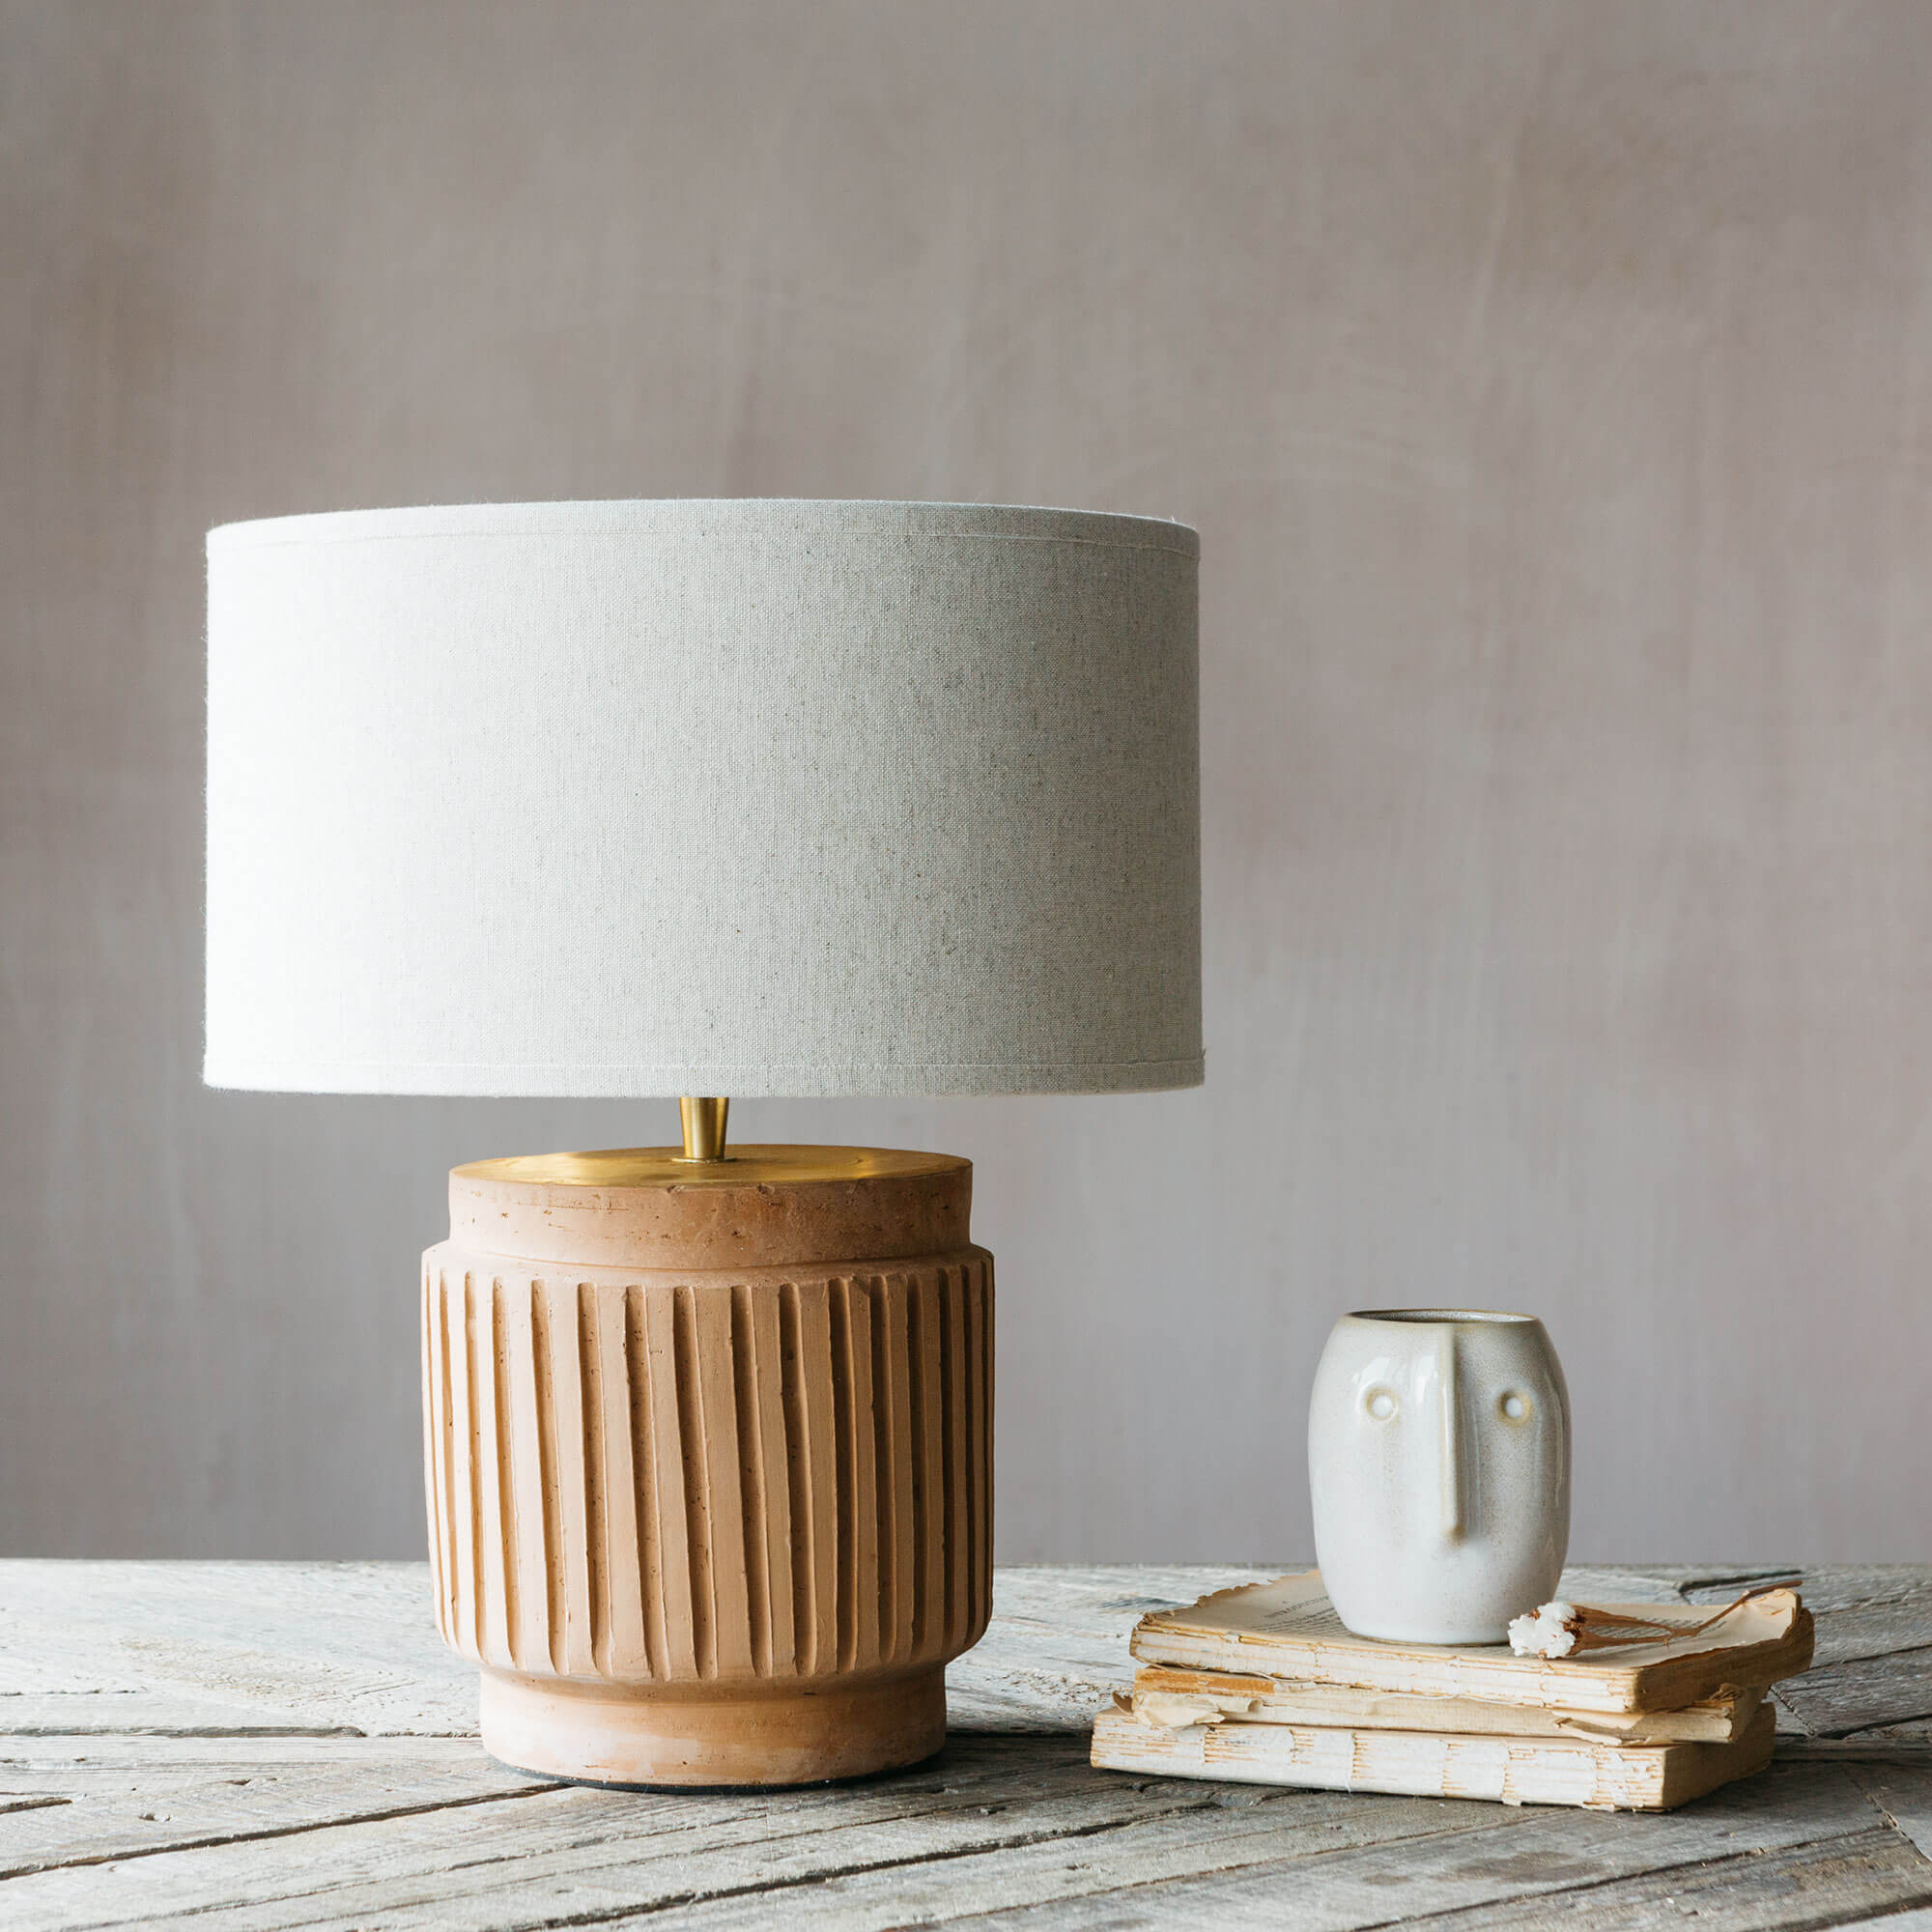 Read more about Graham and green frederique wide table lamp